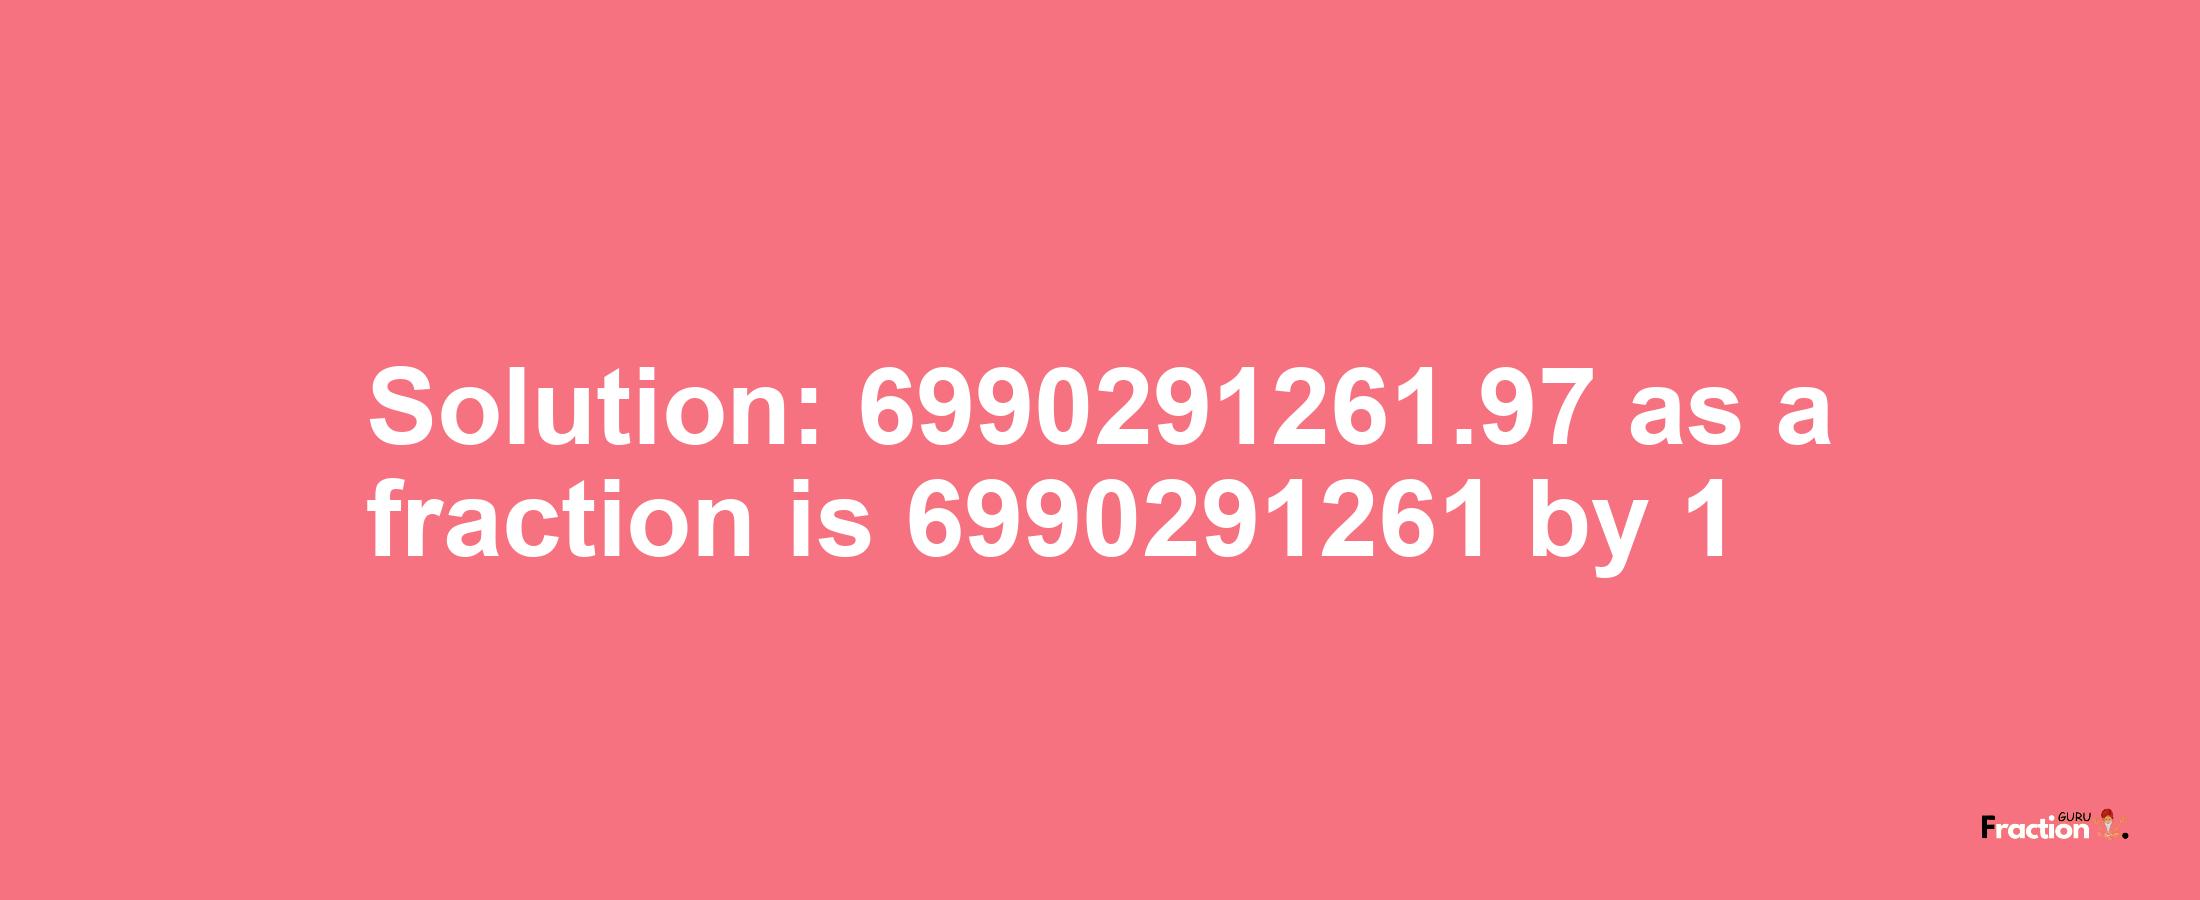 Solution:6990291261.97 as a fraction is 6990291261/1